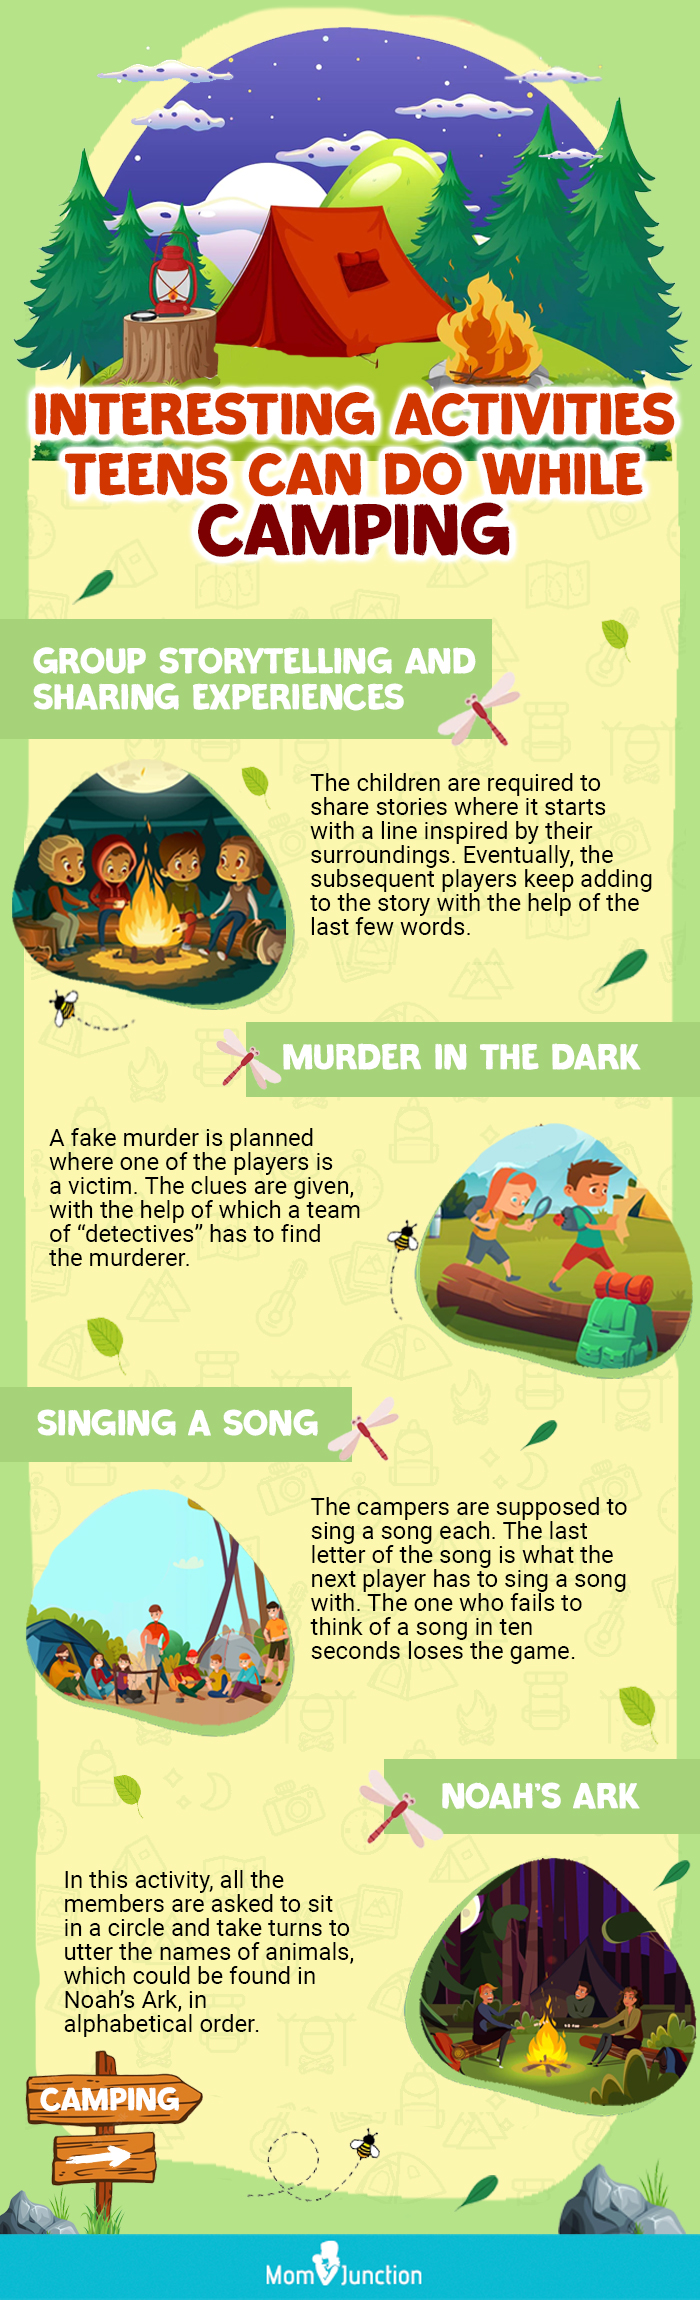 interesting activities teens can do while camping (infographic)